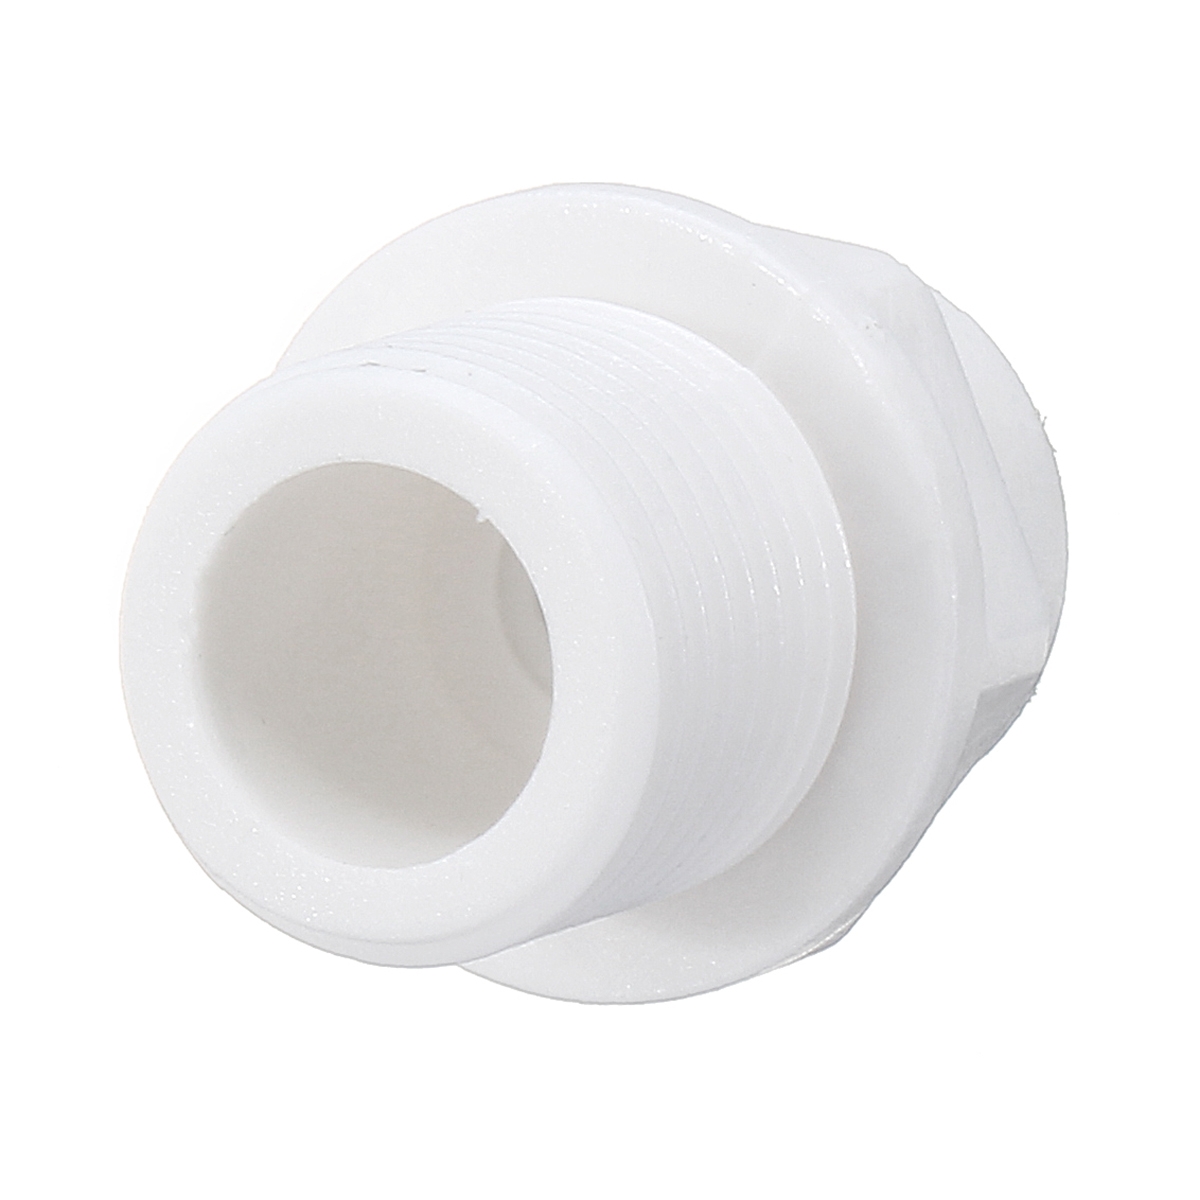 12-14-Inch-RO-Grade-Water-Tube-Quick-Connect-Parts-Fitting-Tube-Fit-Pipe-Water-Filter-Connector-1400382